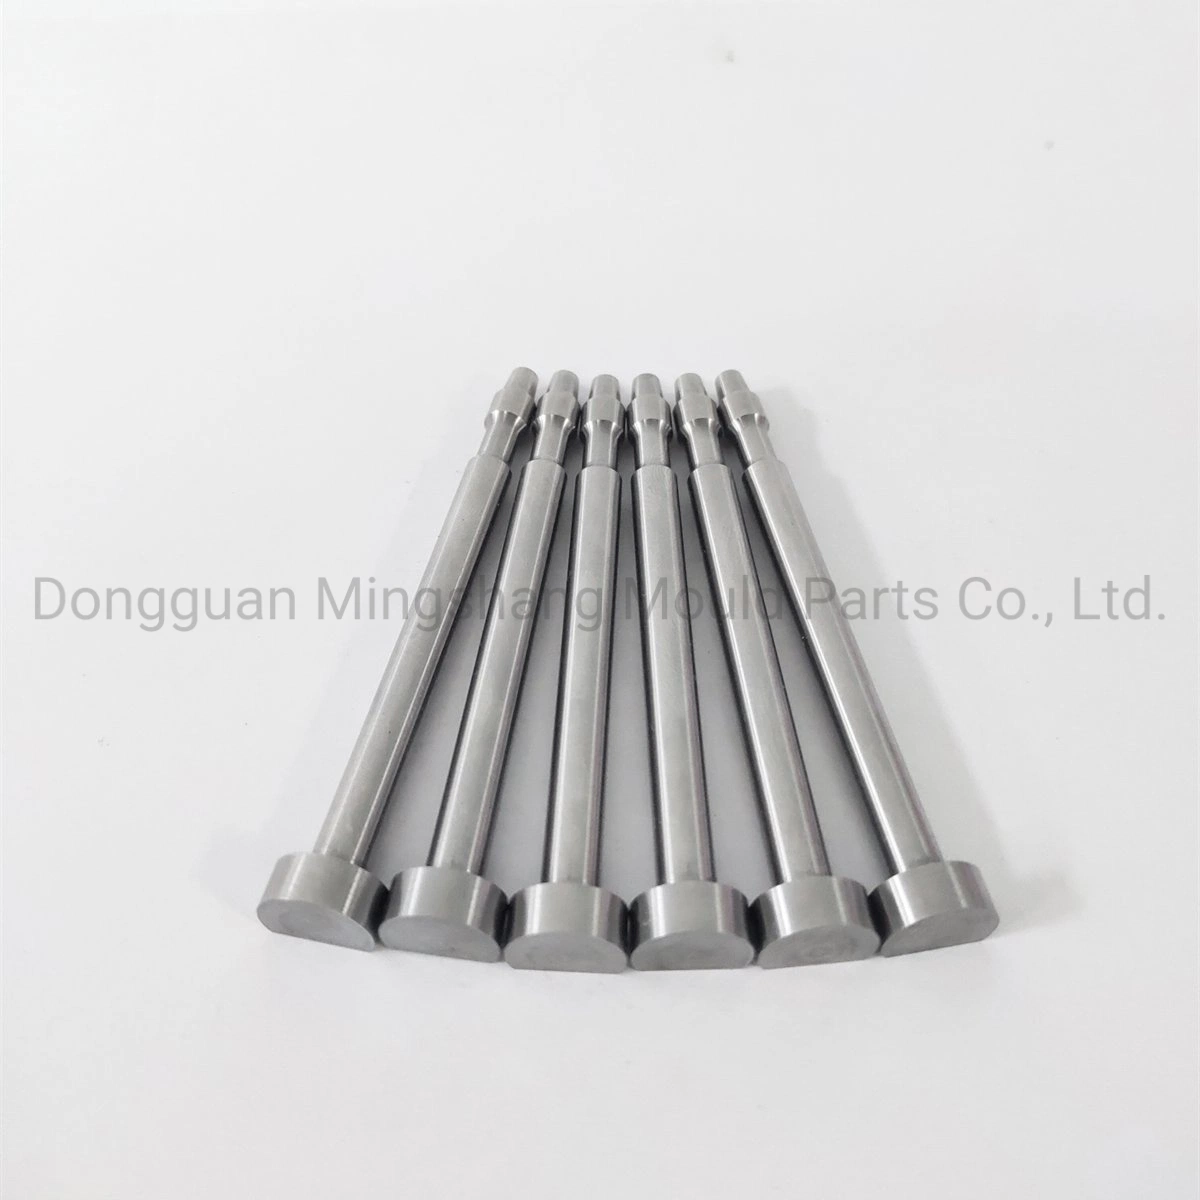 High Precision Roundness Mold Thimble Ejector Pins with 58 - 60 HRC for Plastic Mould